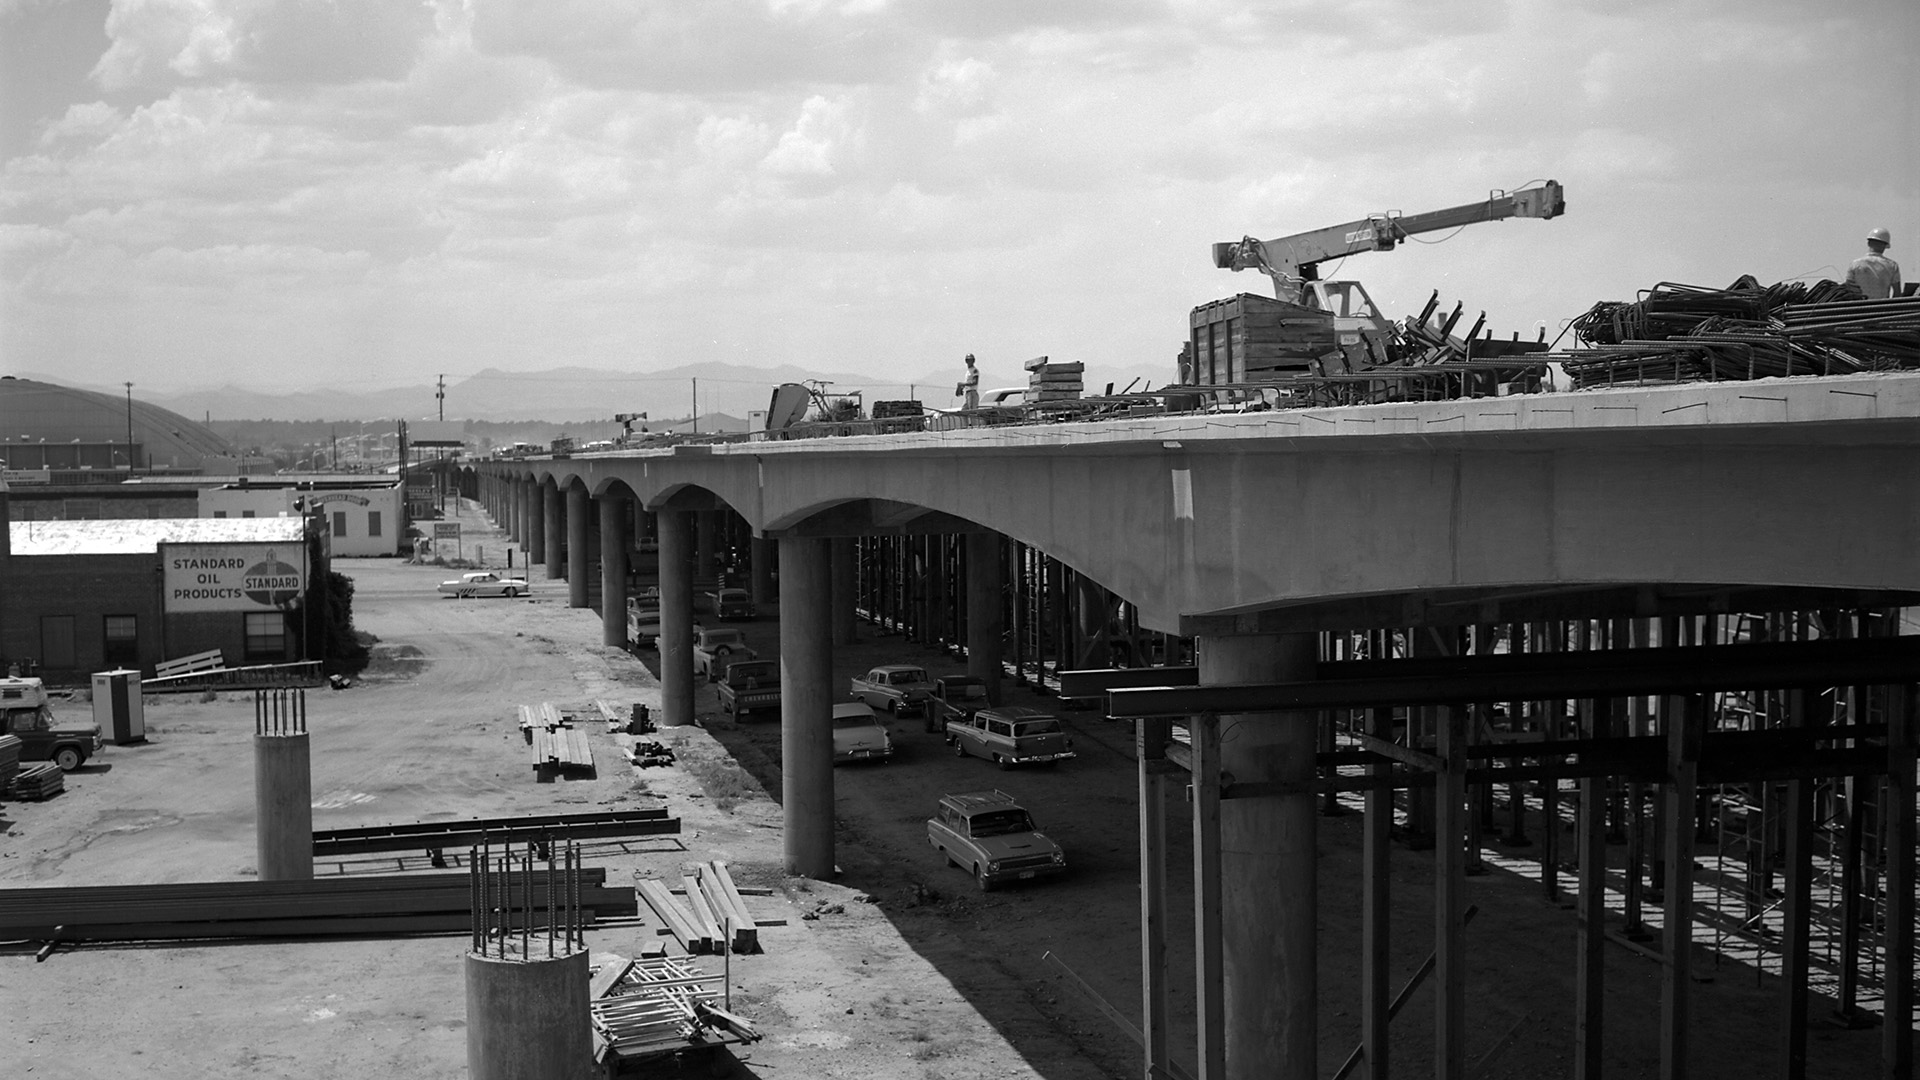 Construction of Interstate 70 in Denver, looking west towards the mountains - circa 1964 (Image courtesy CDOT)